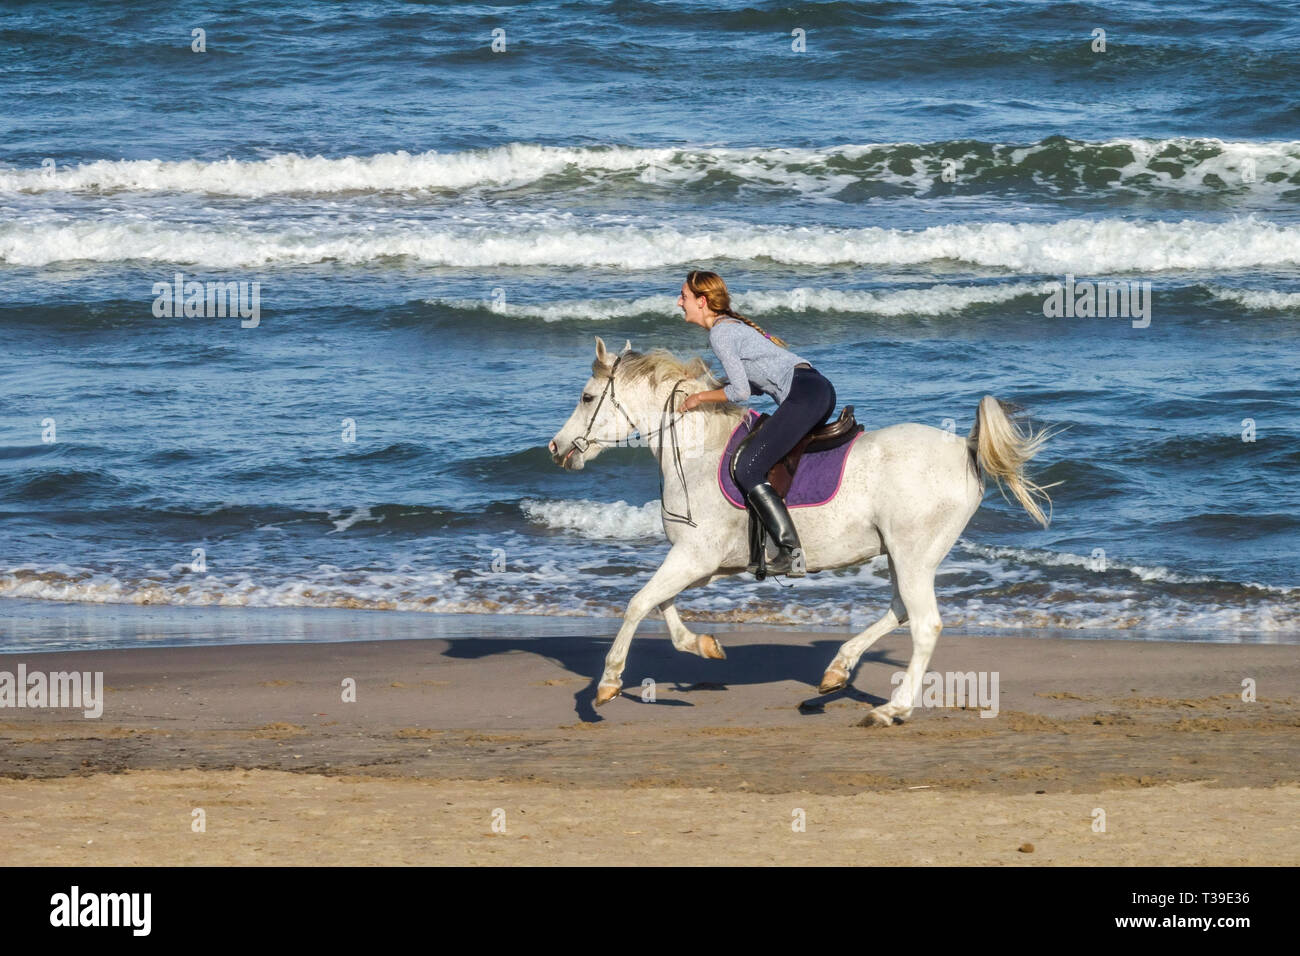 Woman horse riding on a beach fast, coast Spain Europe rider horse, woman on white horse Stock Photo